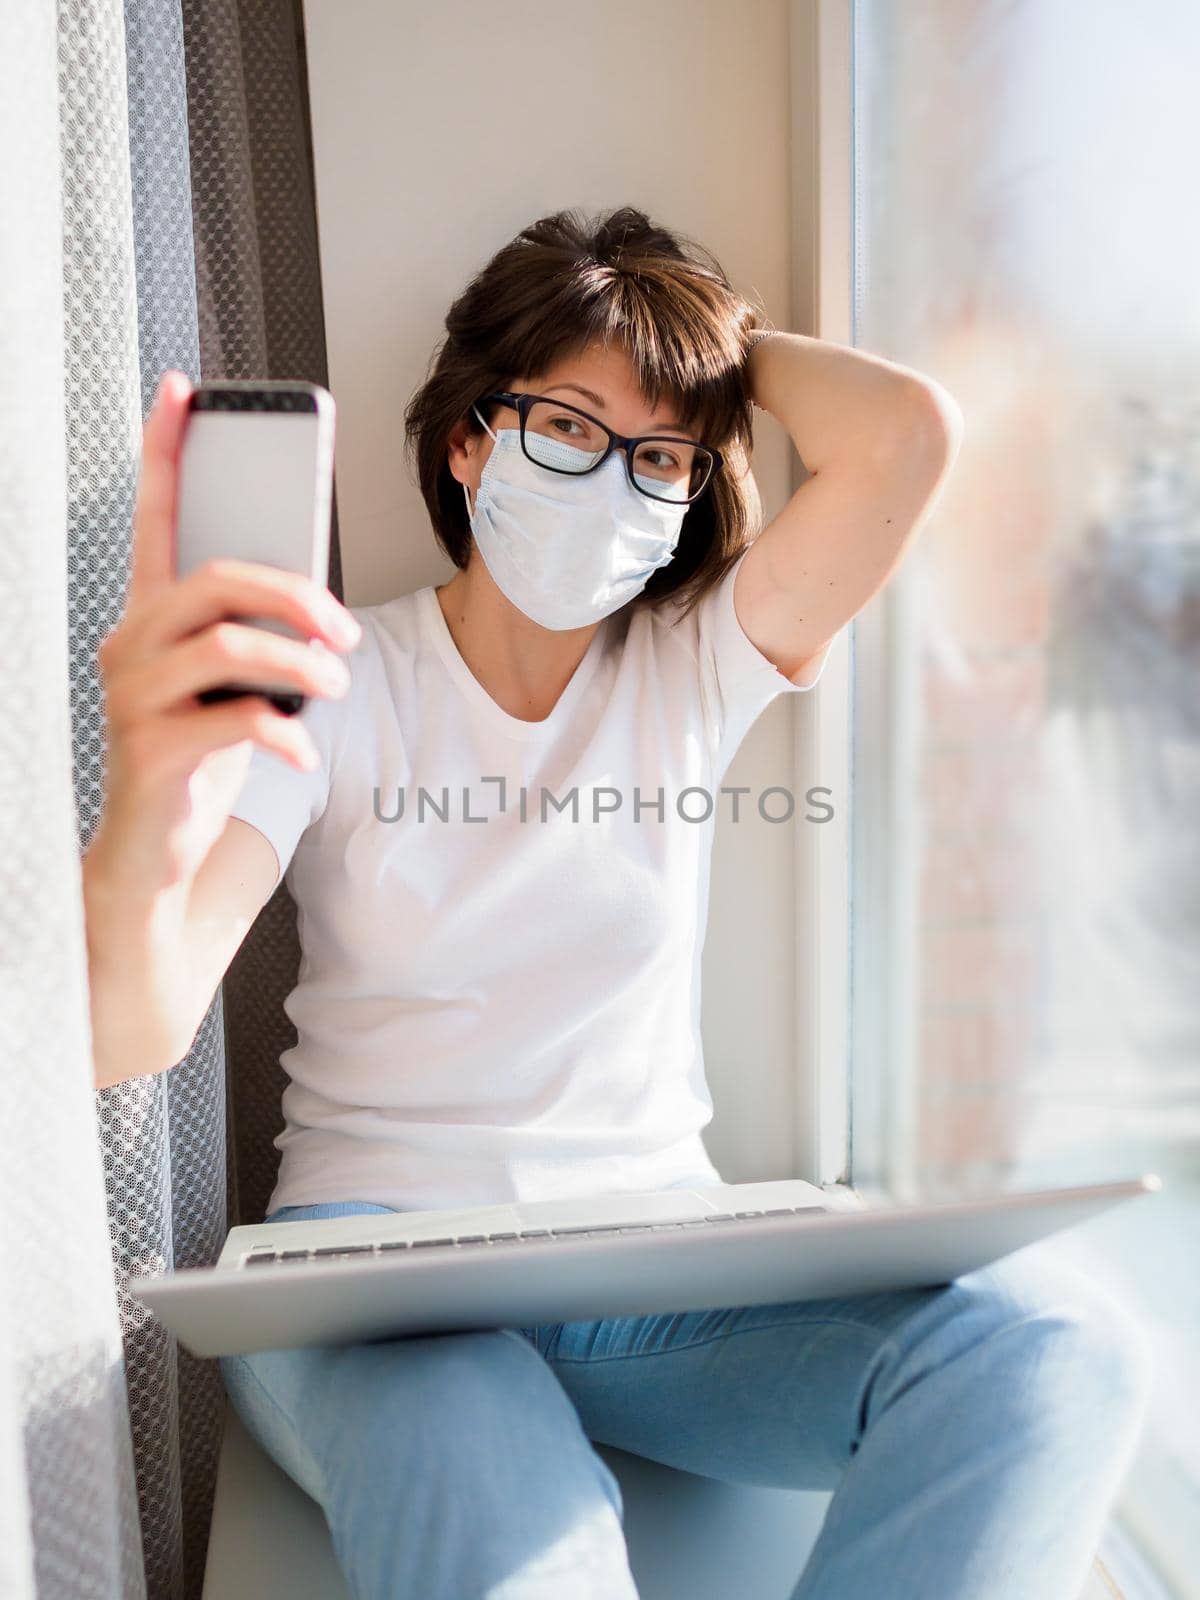 Pretty woman in medical mask remote works from home. She is making selfie on window sill with laptop on knees. Lockdown quarantine because of coronavirus COVID19. Self isolation at home. by aksenovko